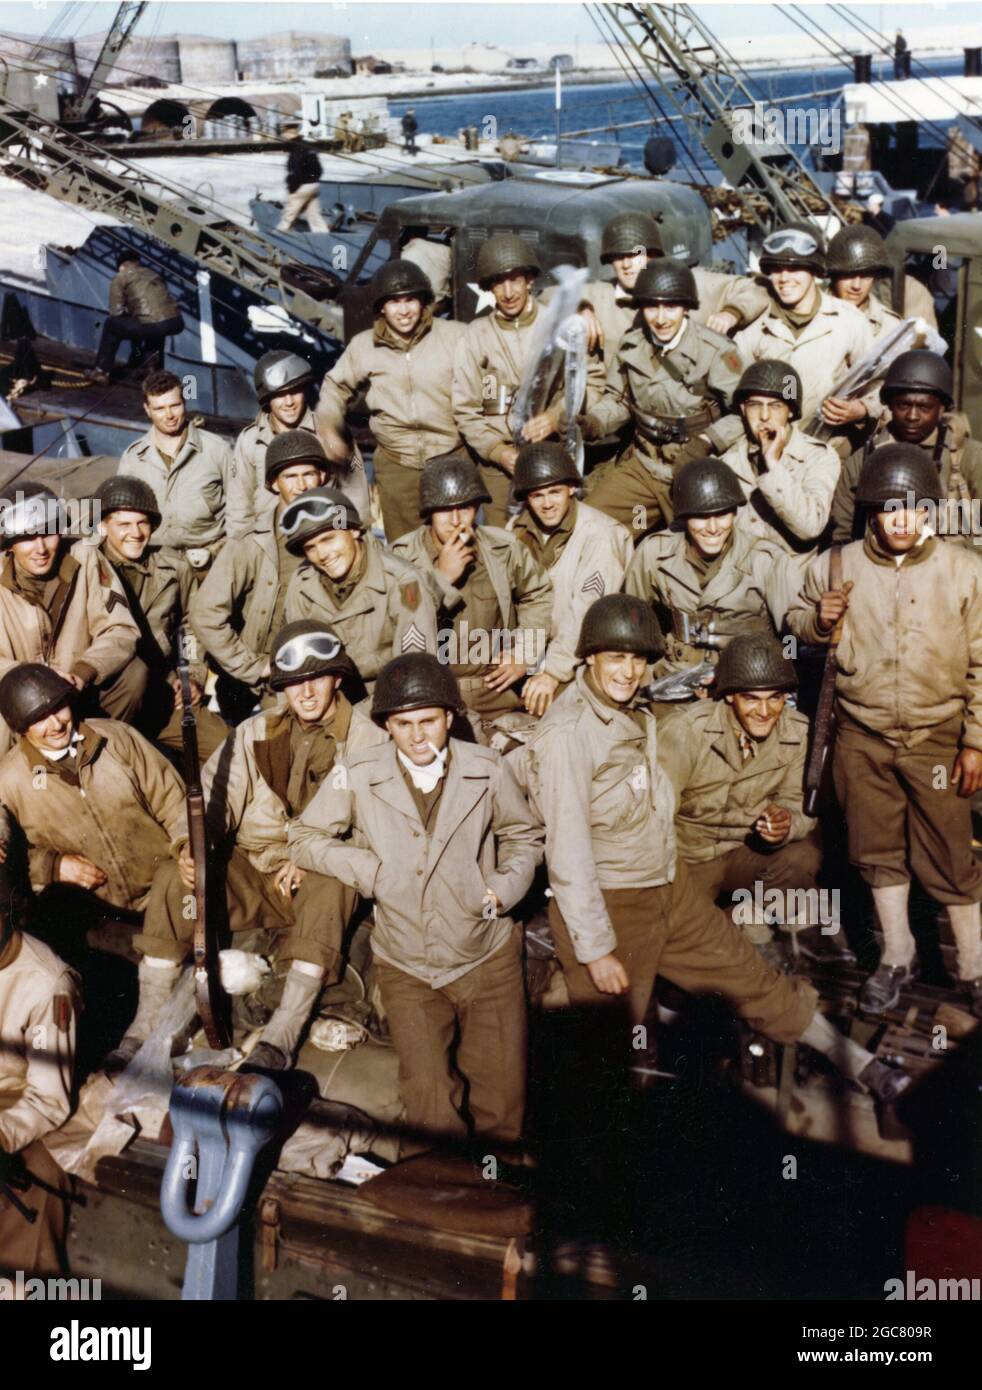 ENGLAND, UK - 4-5 June 1944 - In an unidentified port on the south coast of England, these American troops have loaded their equipment onto an LCT and Stock Photo